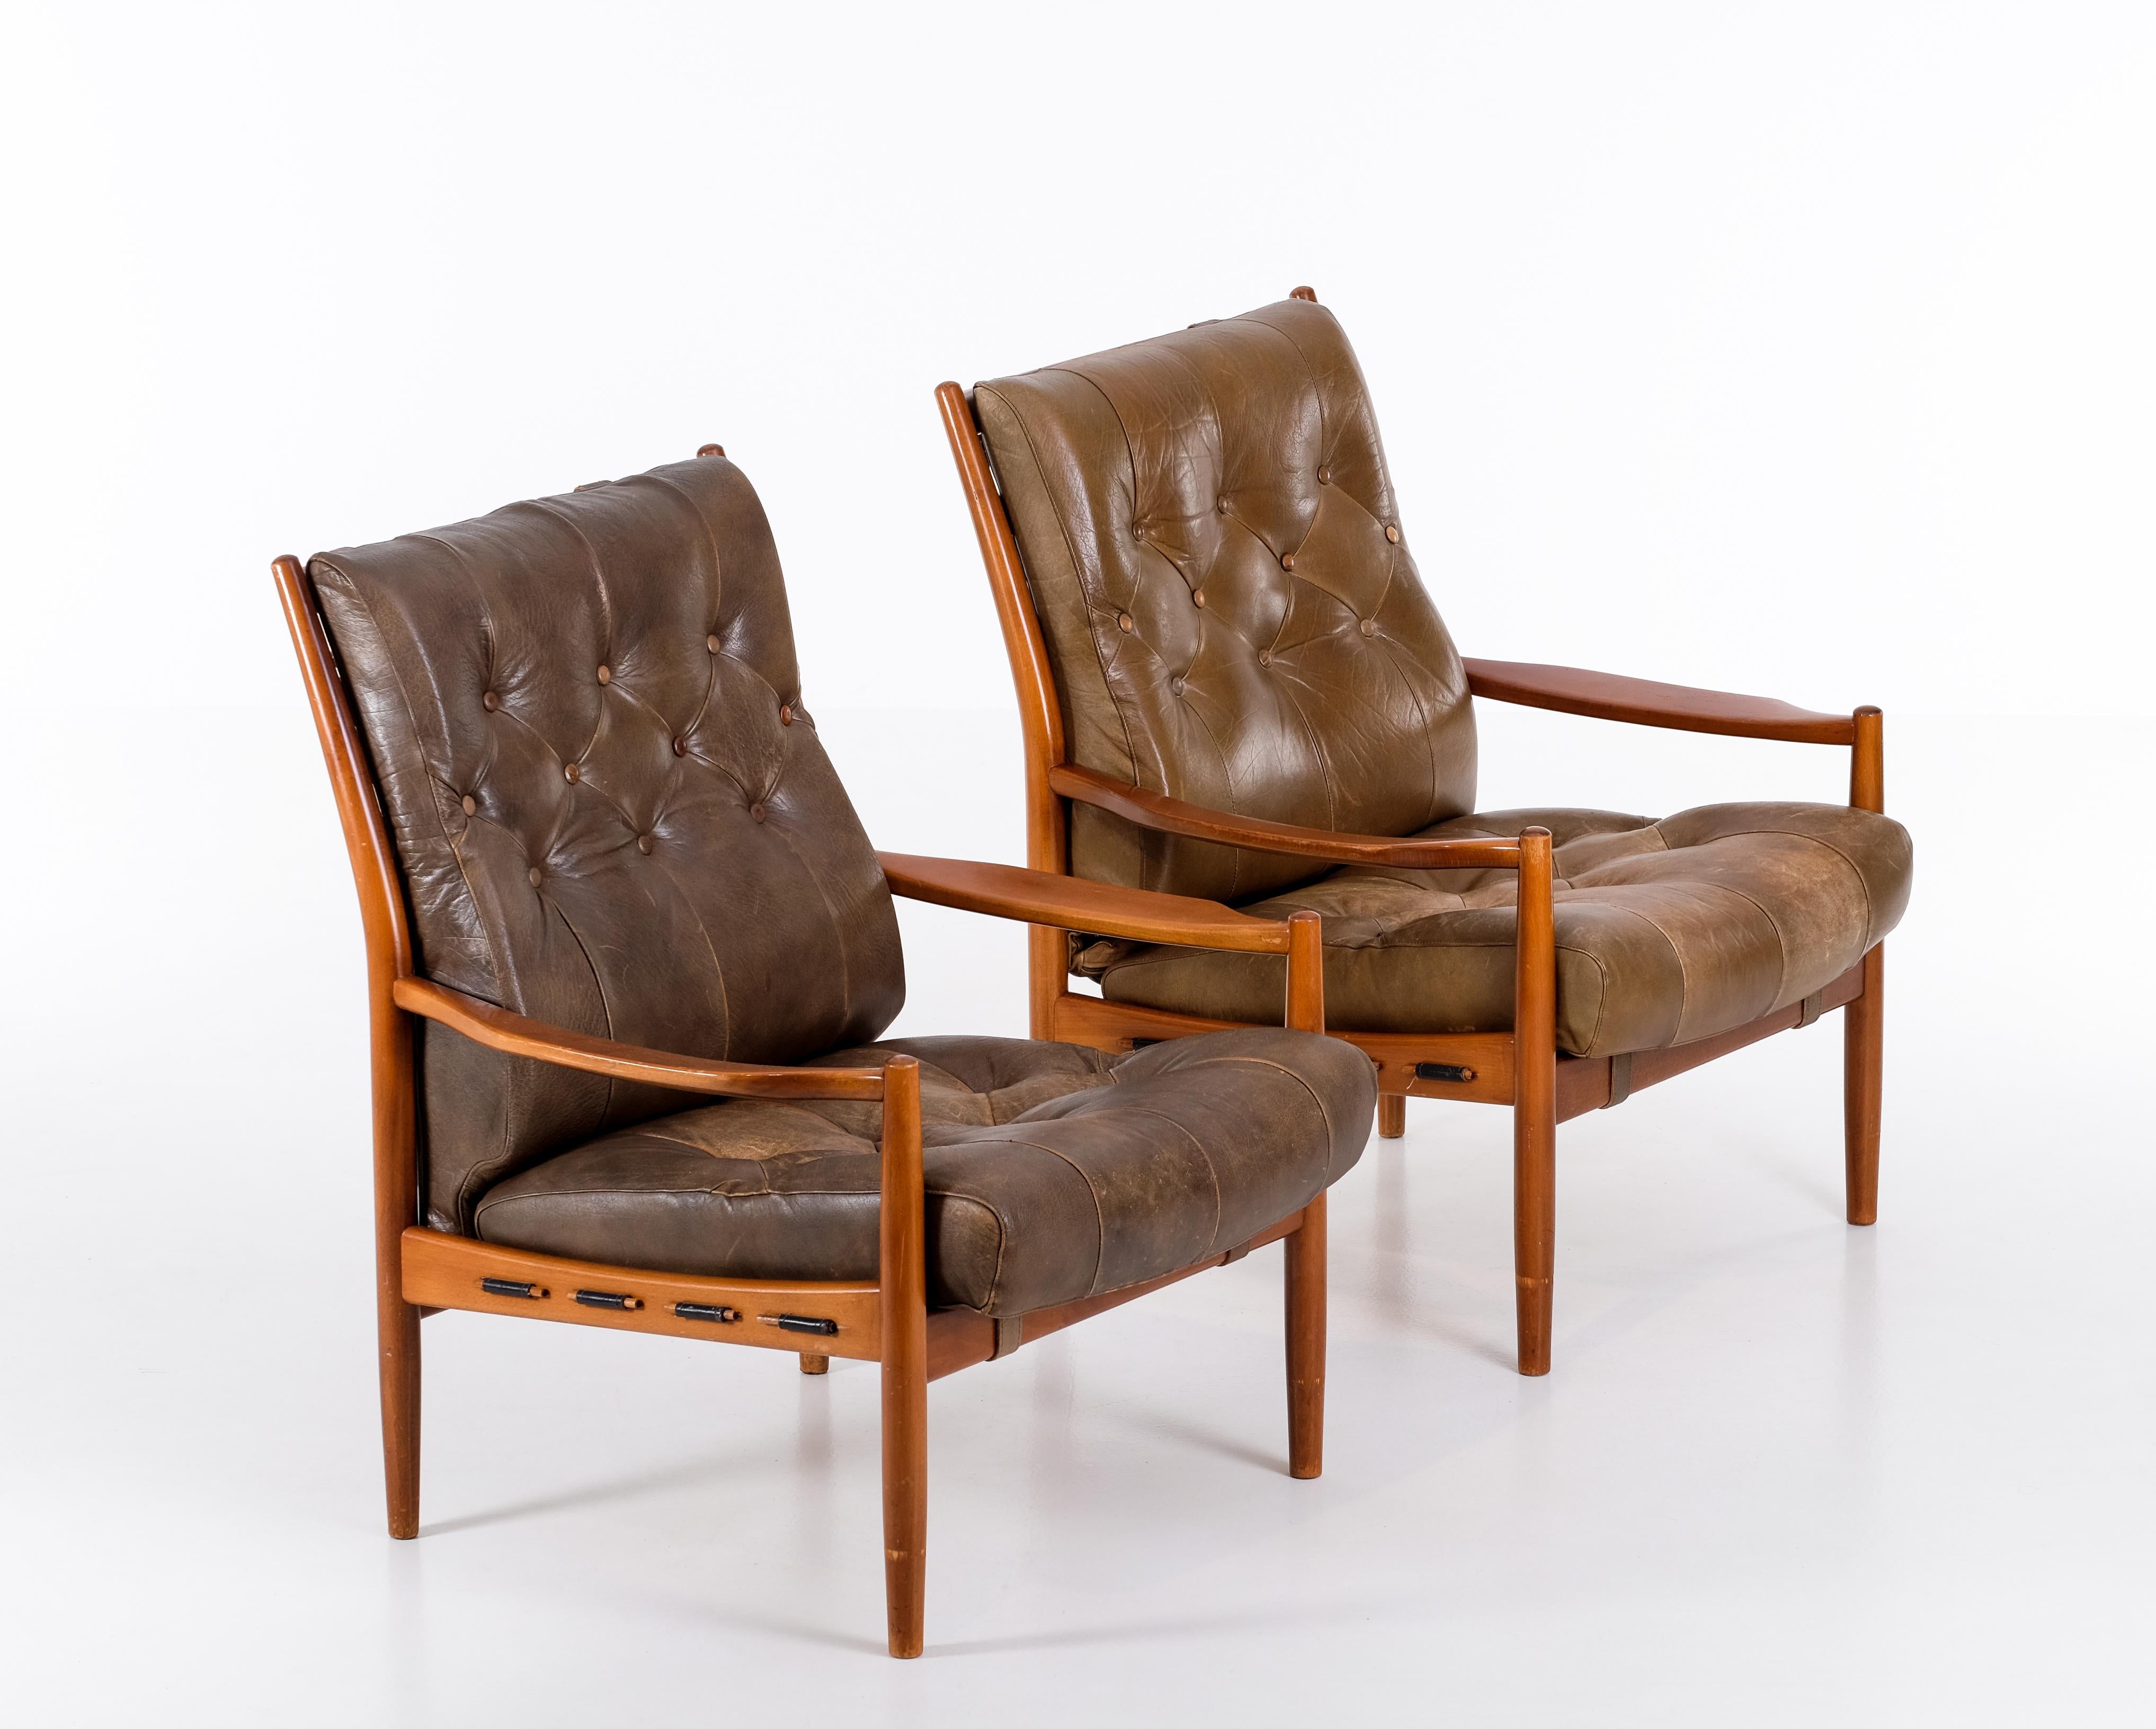 Mid-20th Century Pair of 'Läckö' Easy Chairs by Ingemar Thillmark, 1960s For Sale